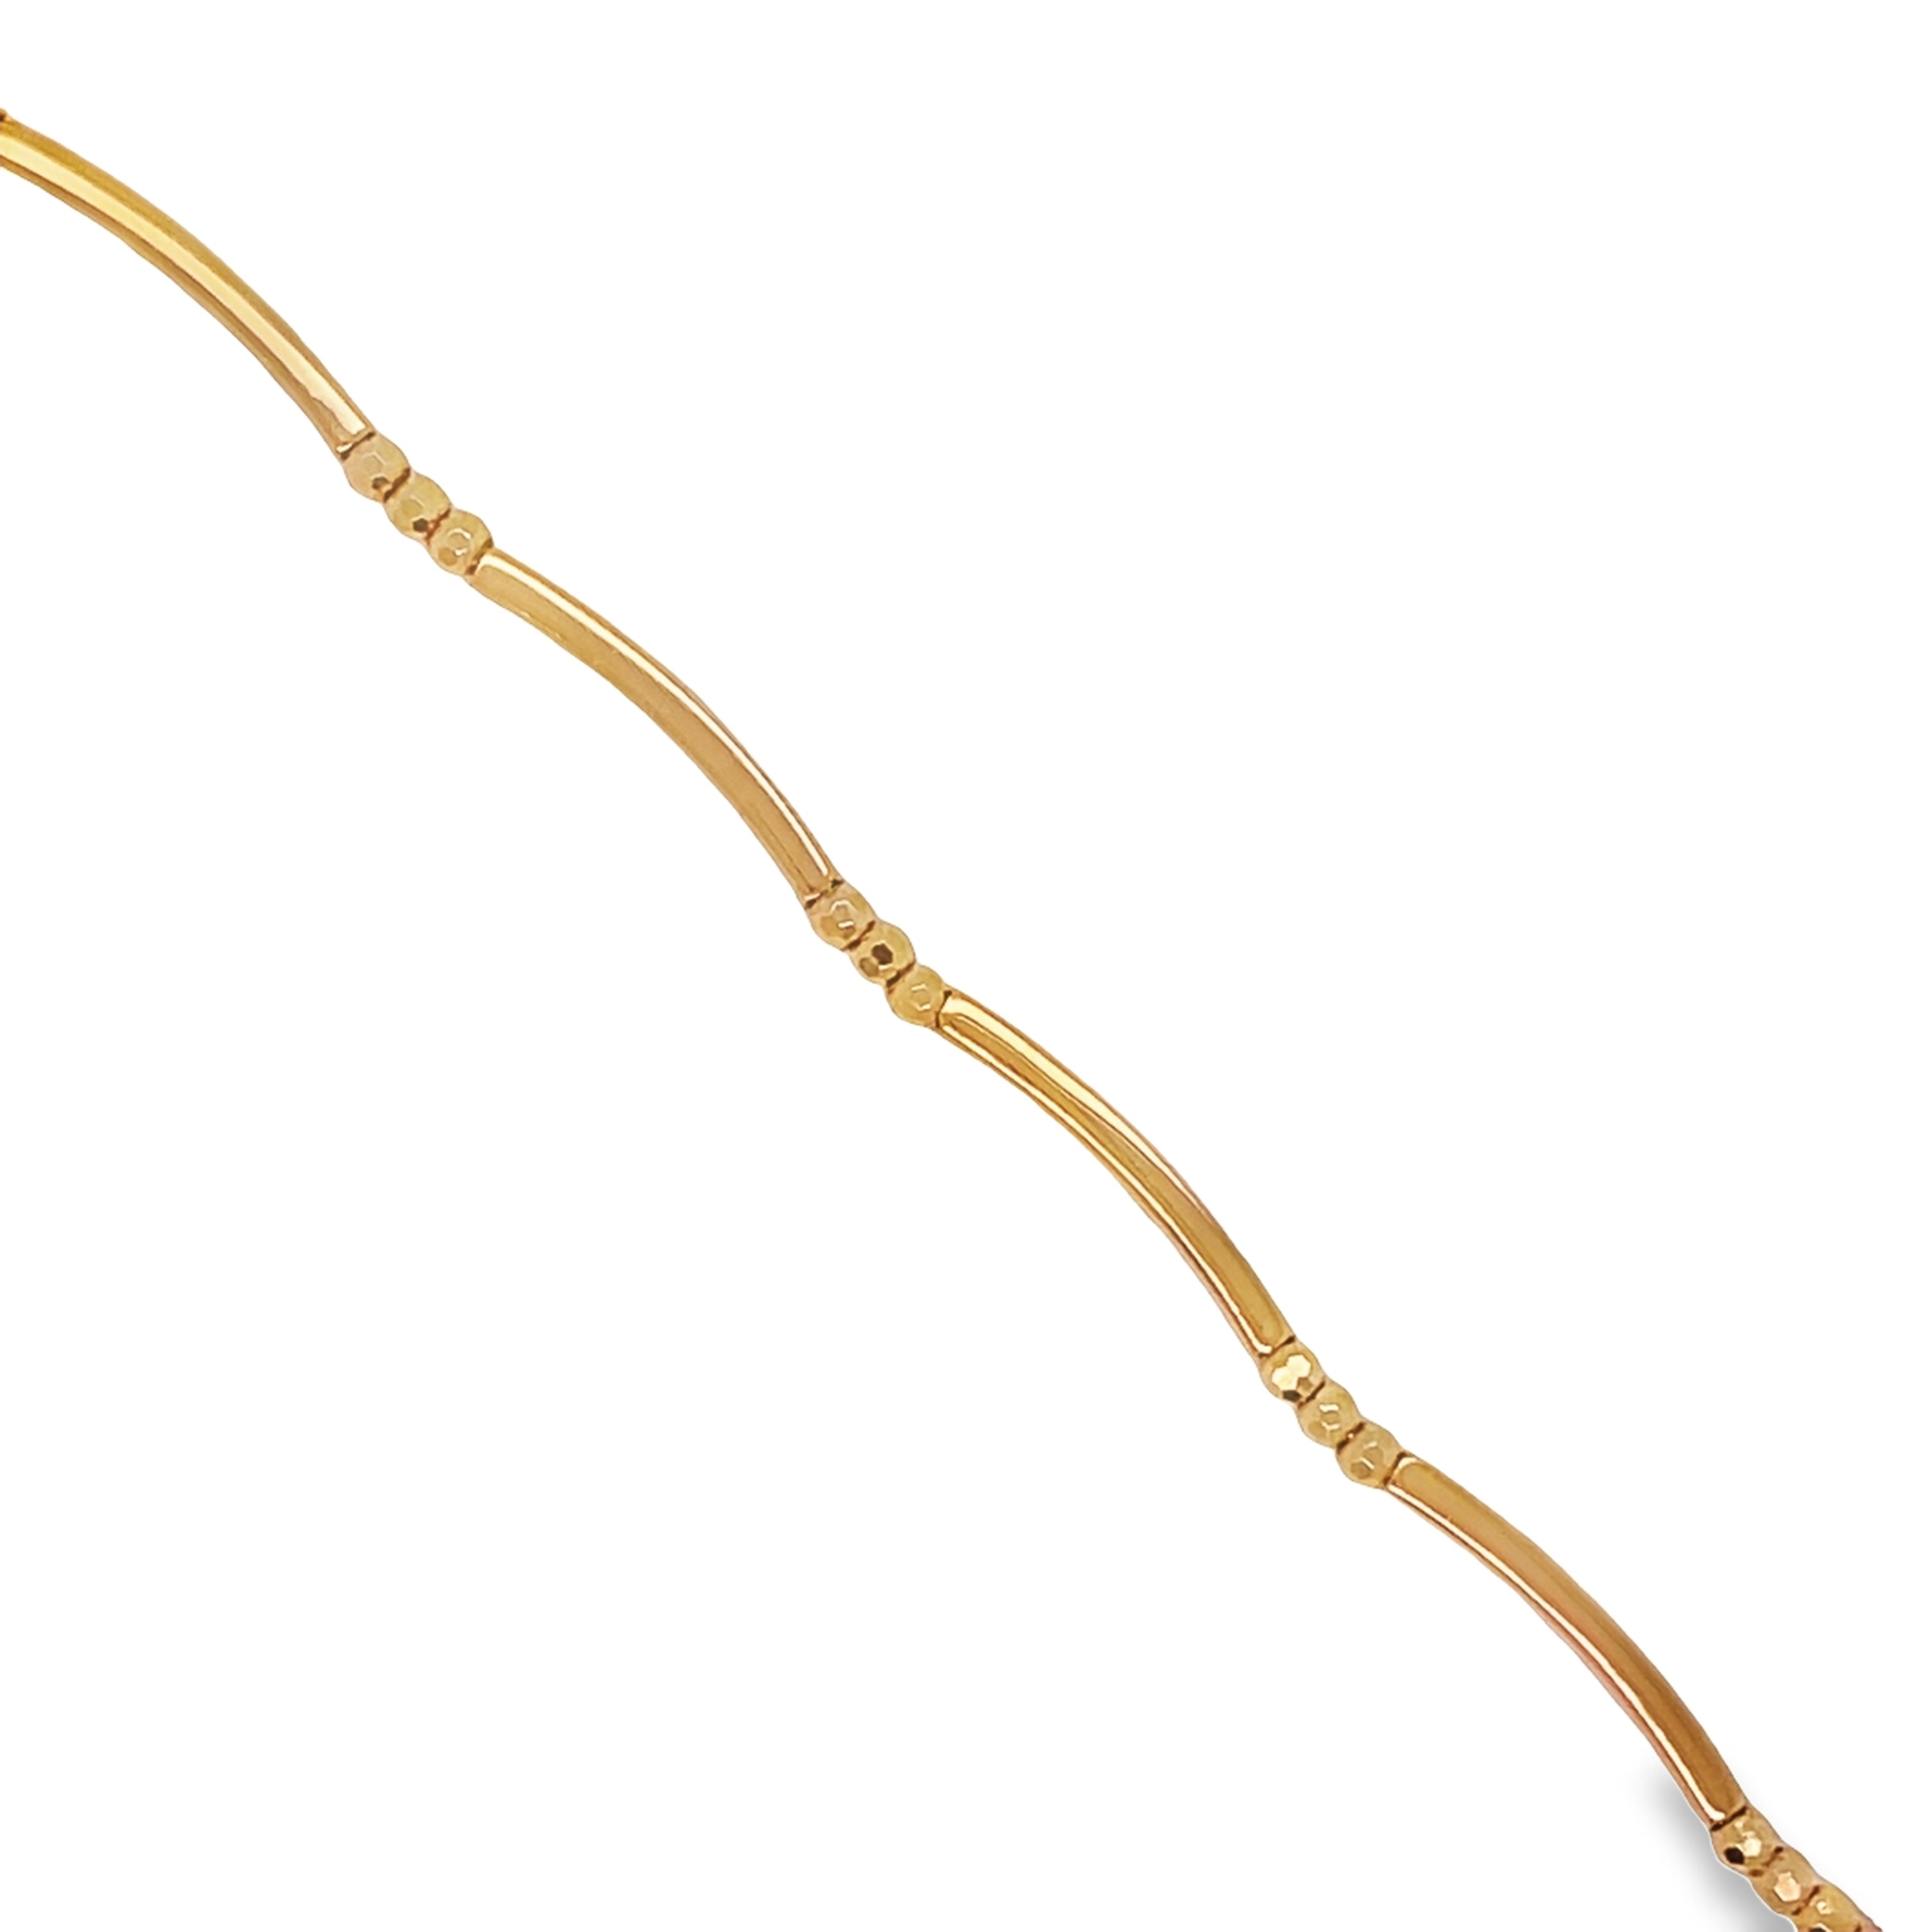 This 14k yellow gold bracelet features sectional curves, adding an elegant and unique touch. With a secure lobster clasp, it stays put all day. At 7 inches in length, it's the perfect size for most wrists, making it a versatile and luxurious addition to any jewelry collection.